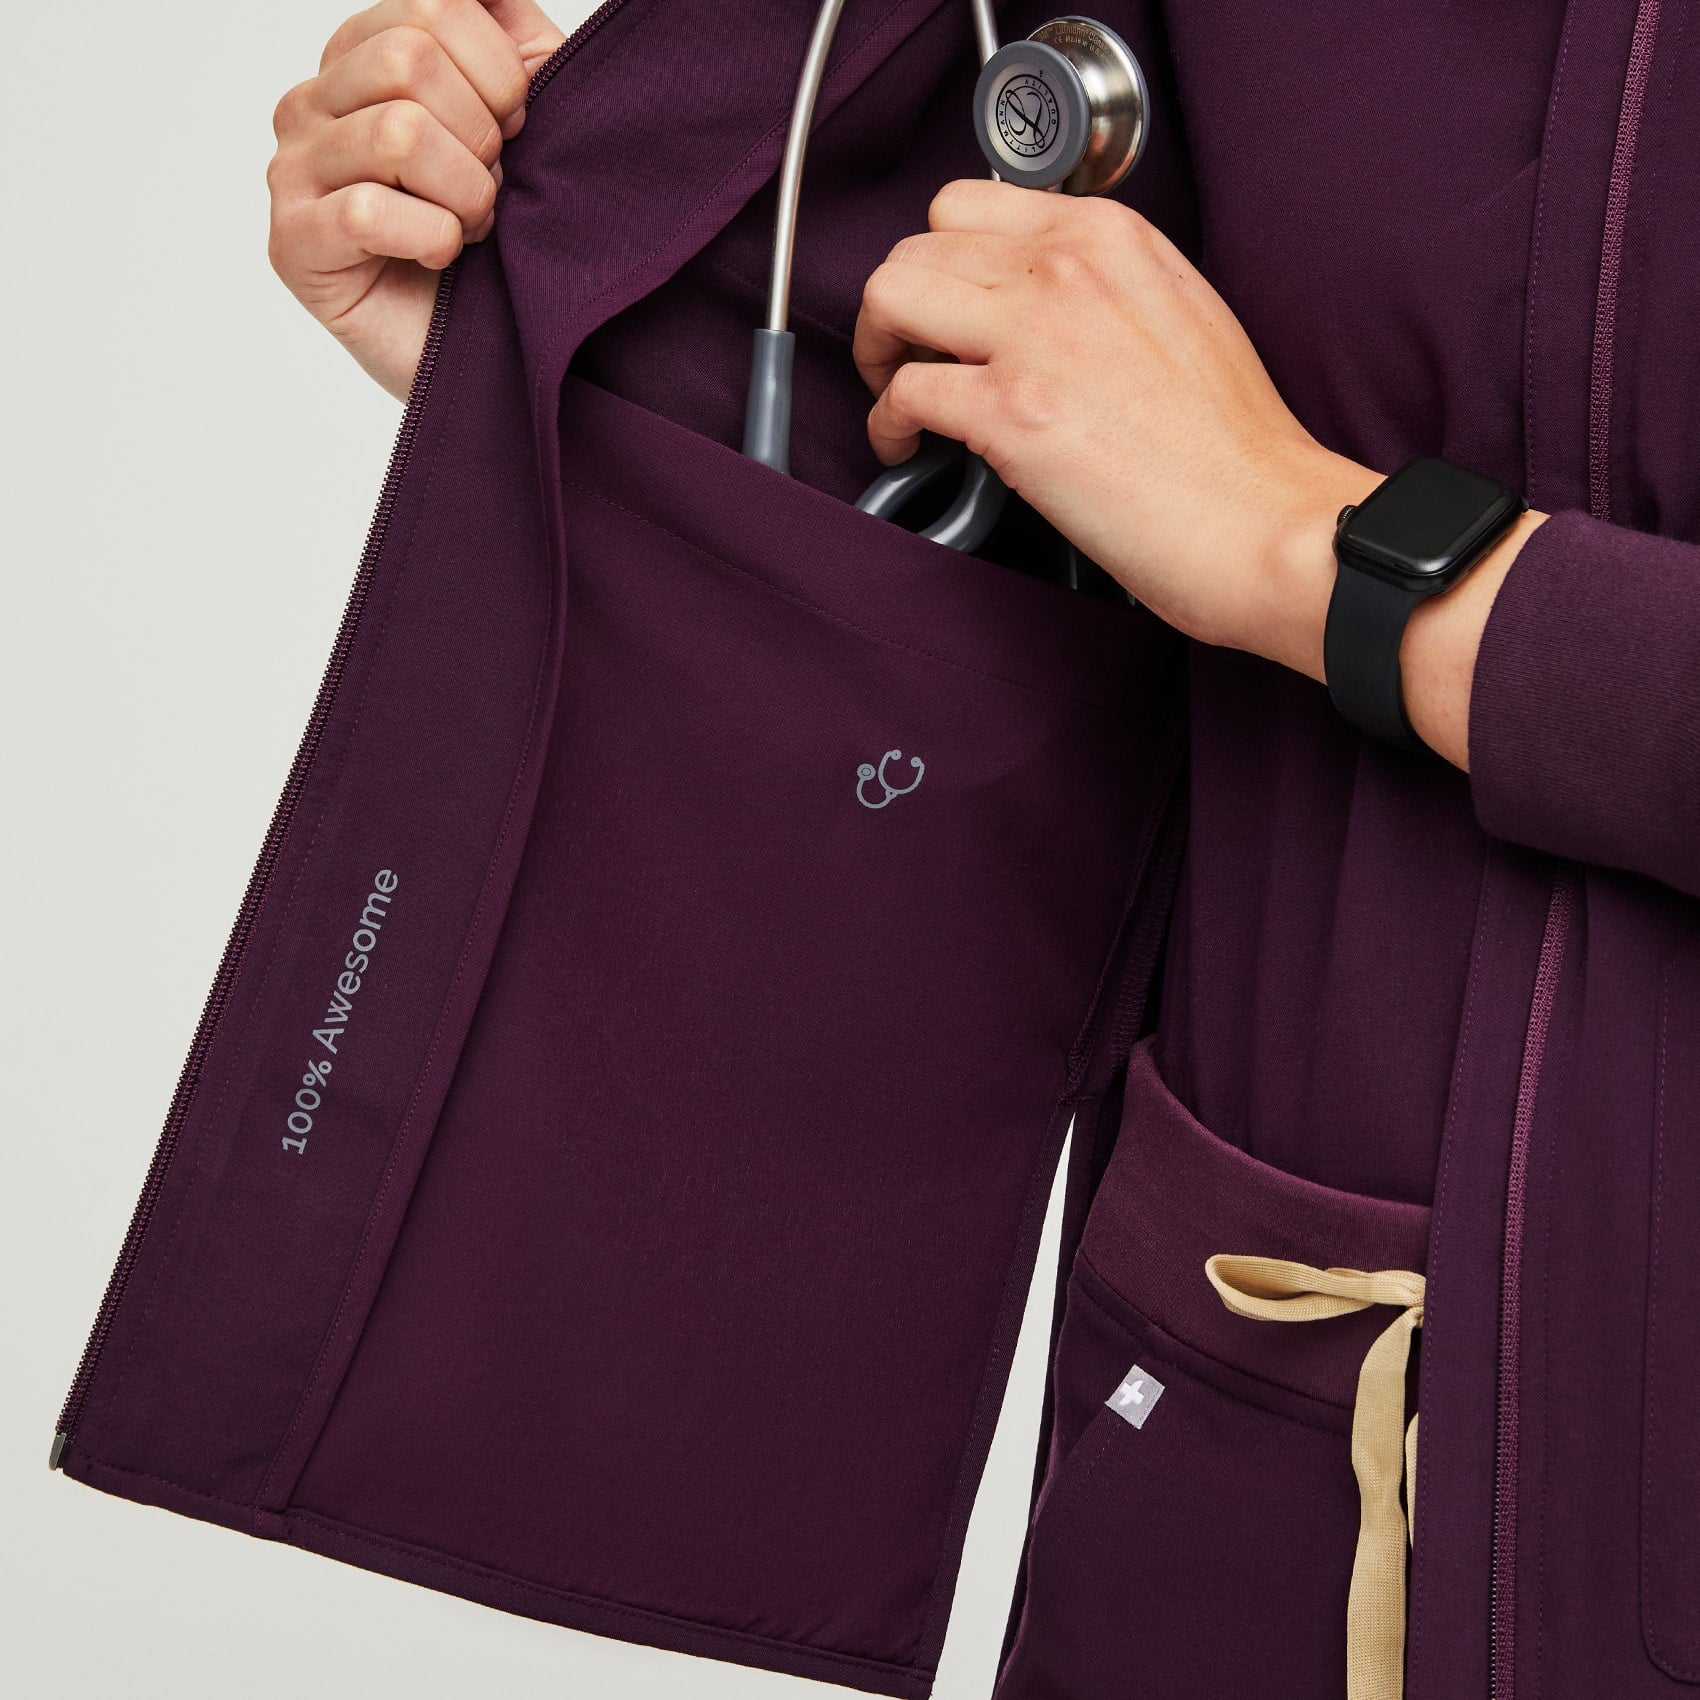 FIGS - Not only do we have scrub jackets, they've been designed with  function in mind - 7 pockets and ease of movement make her essential. ☝️  Find the Bellery Scrub Jacket